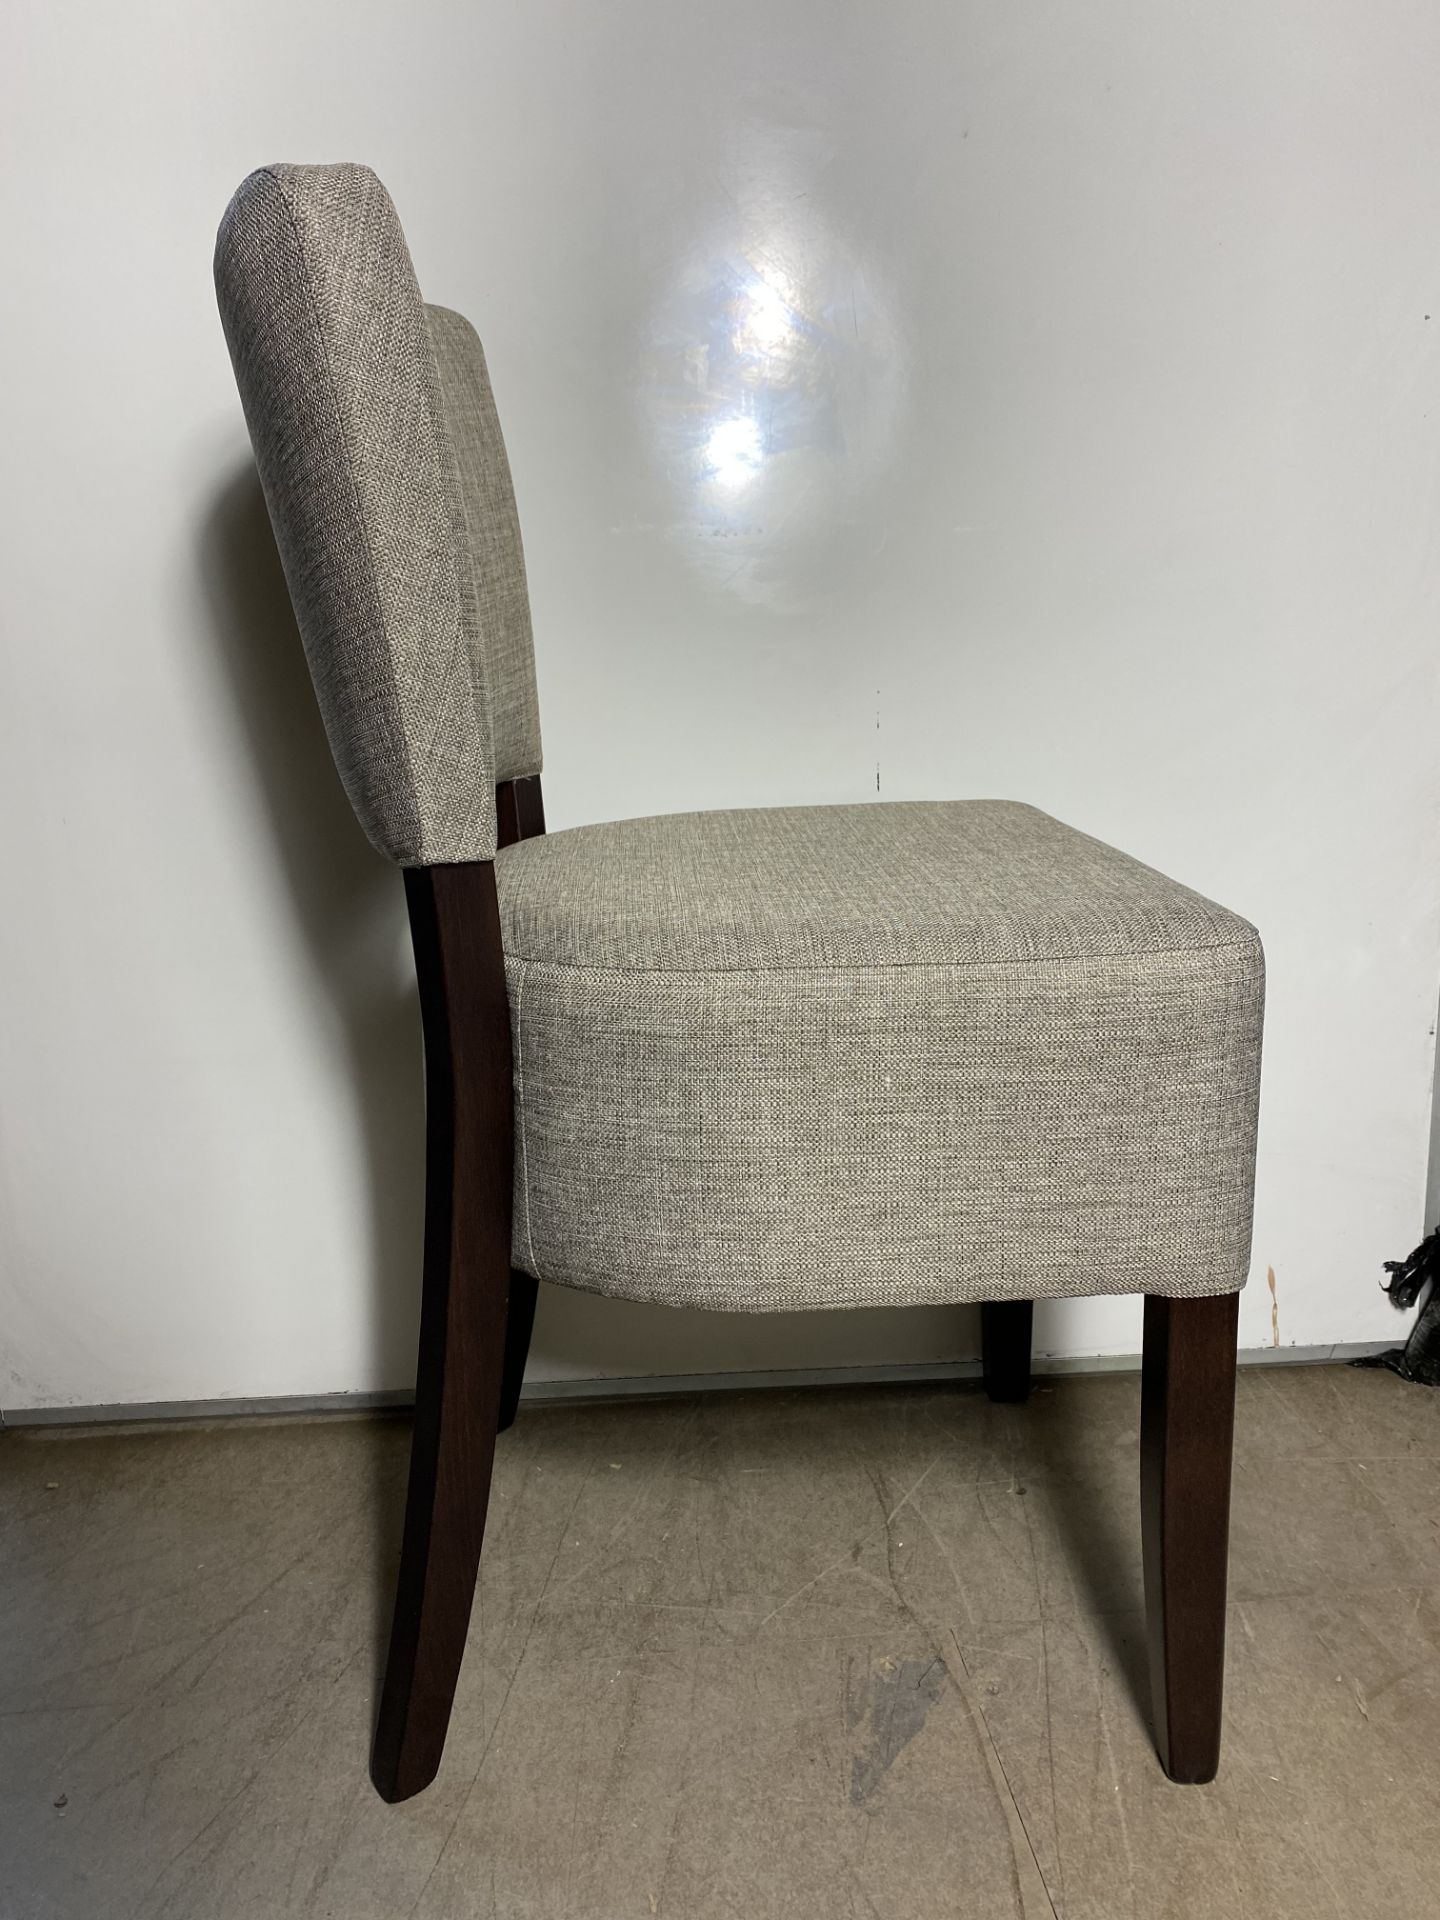 4 x Next Memphis Side Chairs | O3TN03 - Image 2 of 6